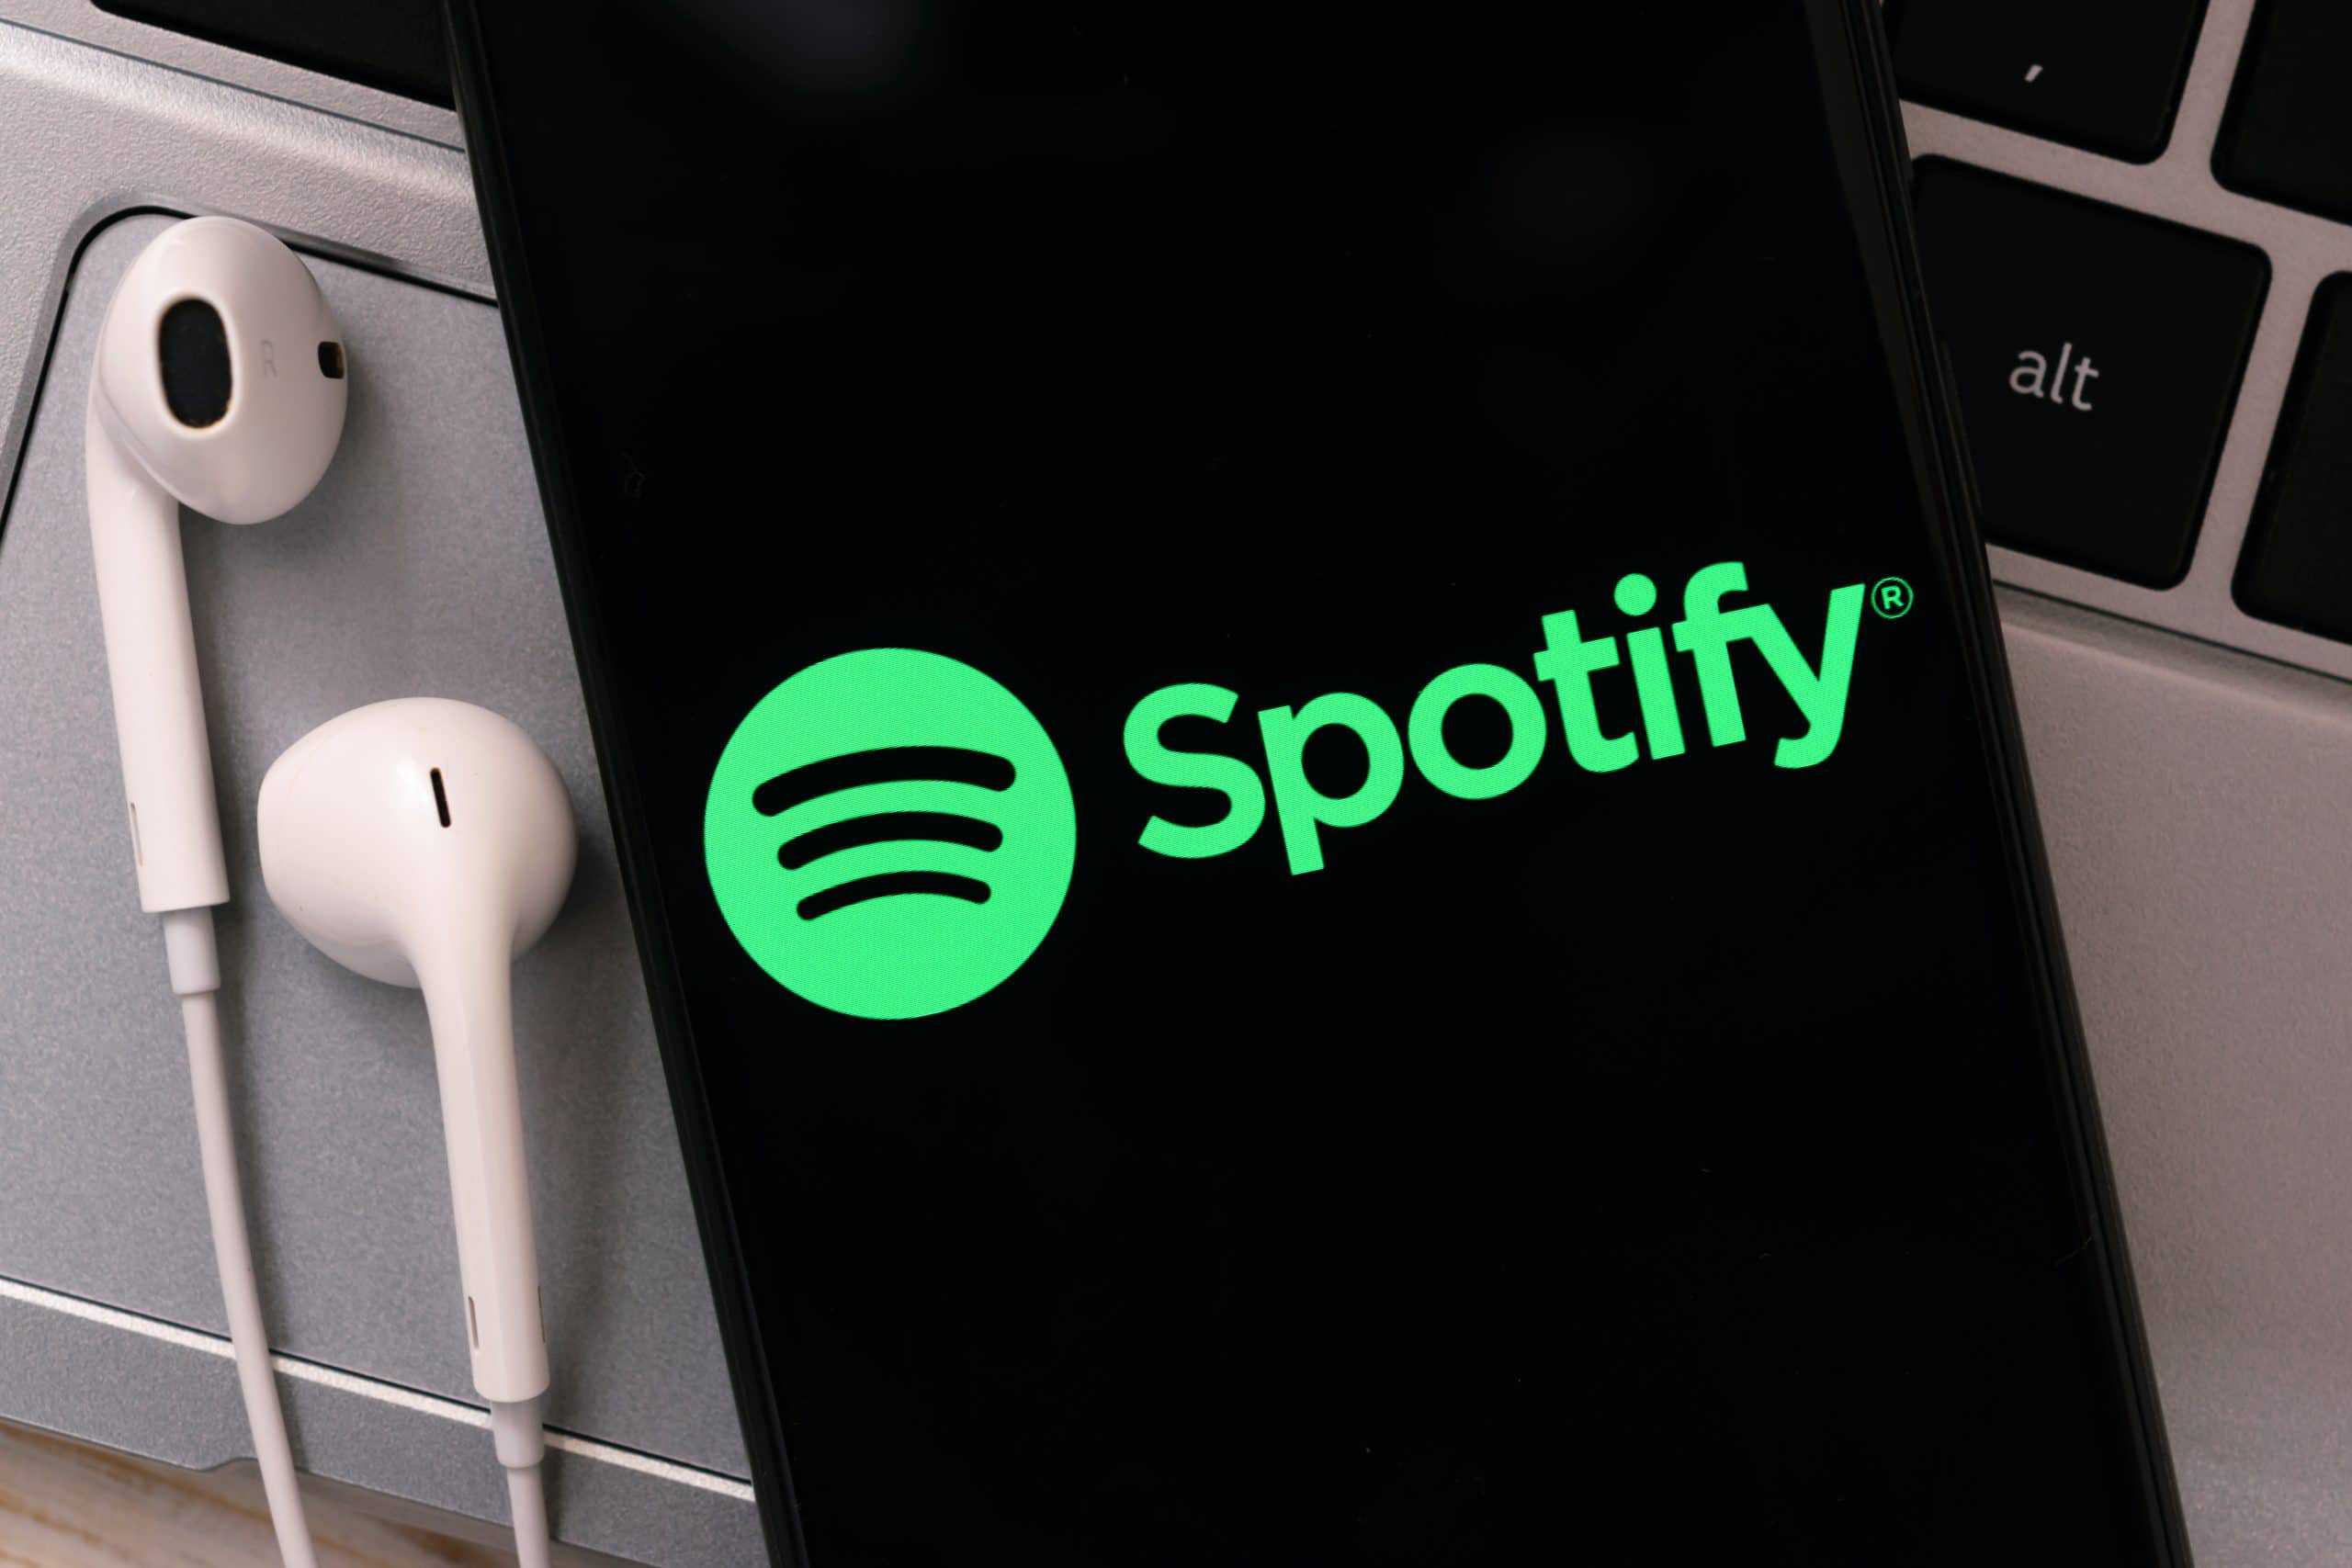 Spotify loses market value of $2 billion due to Covid-19 misinformation